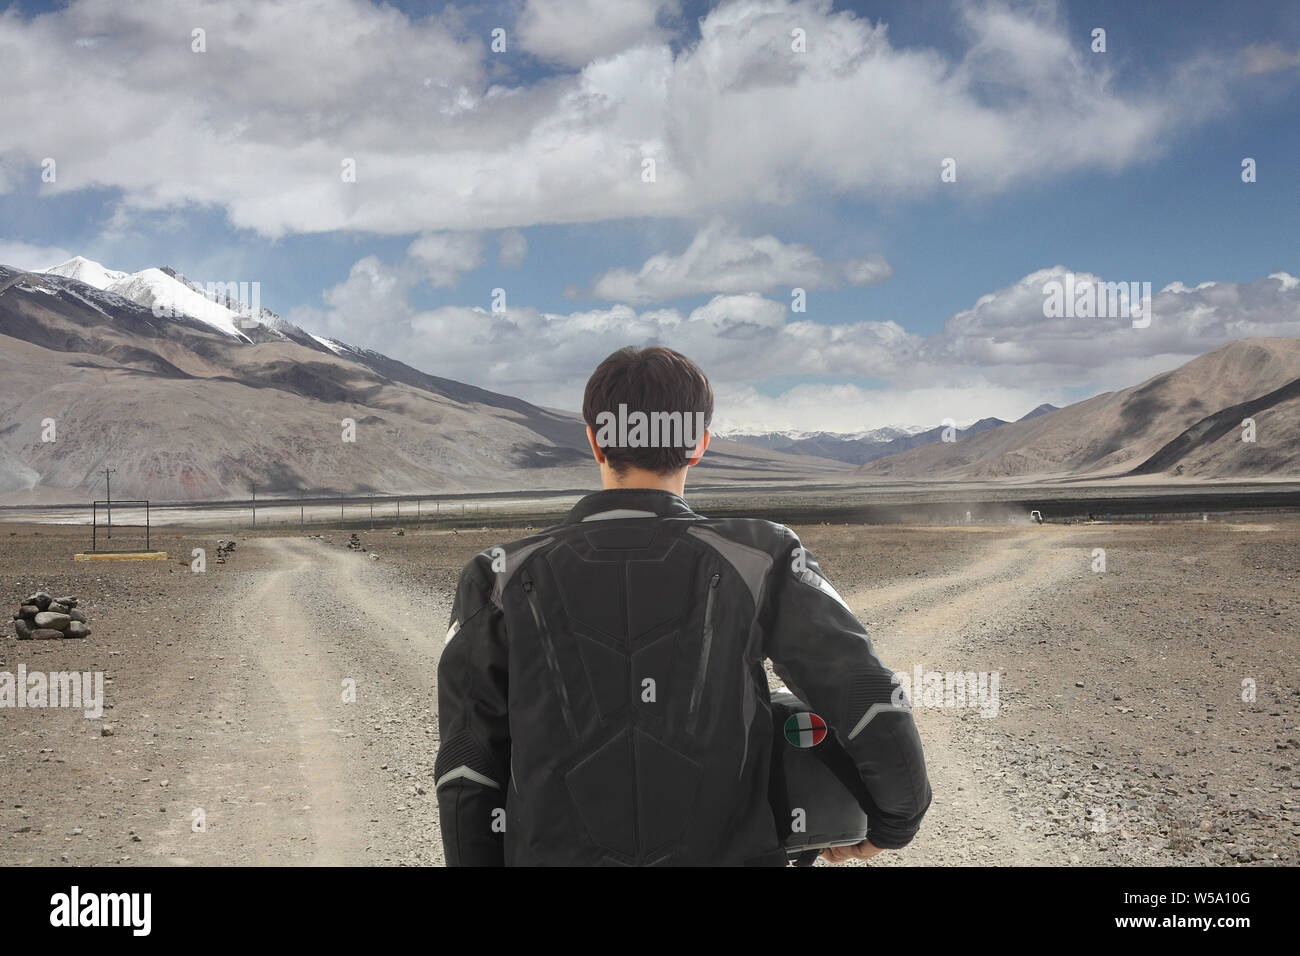 Rear view of biker standing at fork in dirt road, Ladakh, Jammu and Kashmir, India Stock Photo